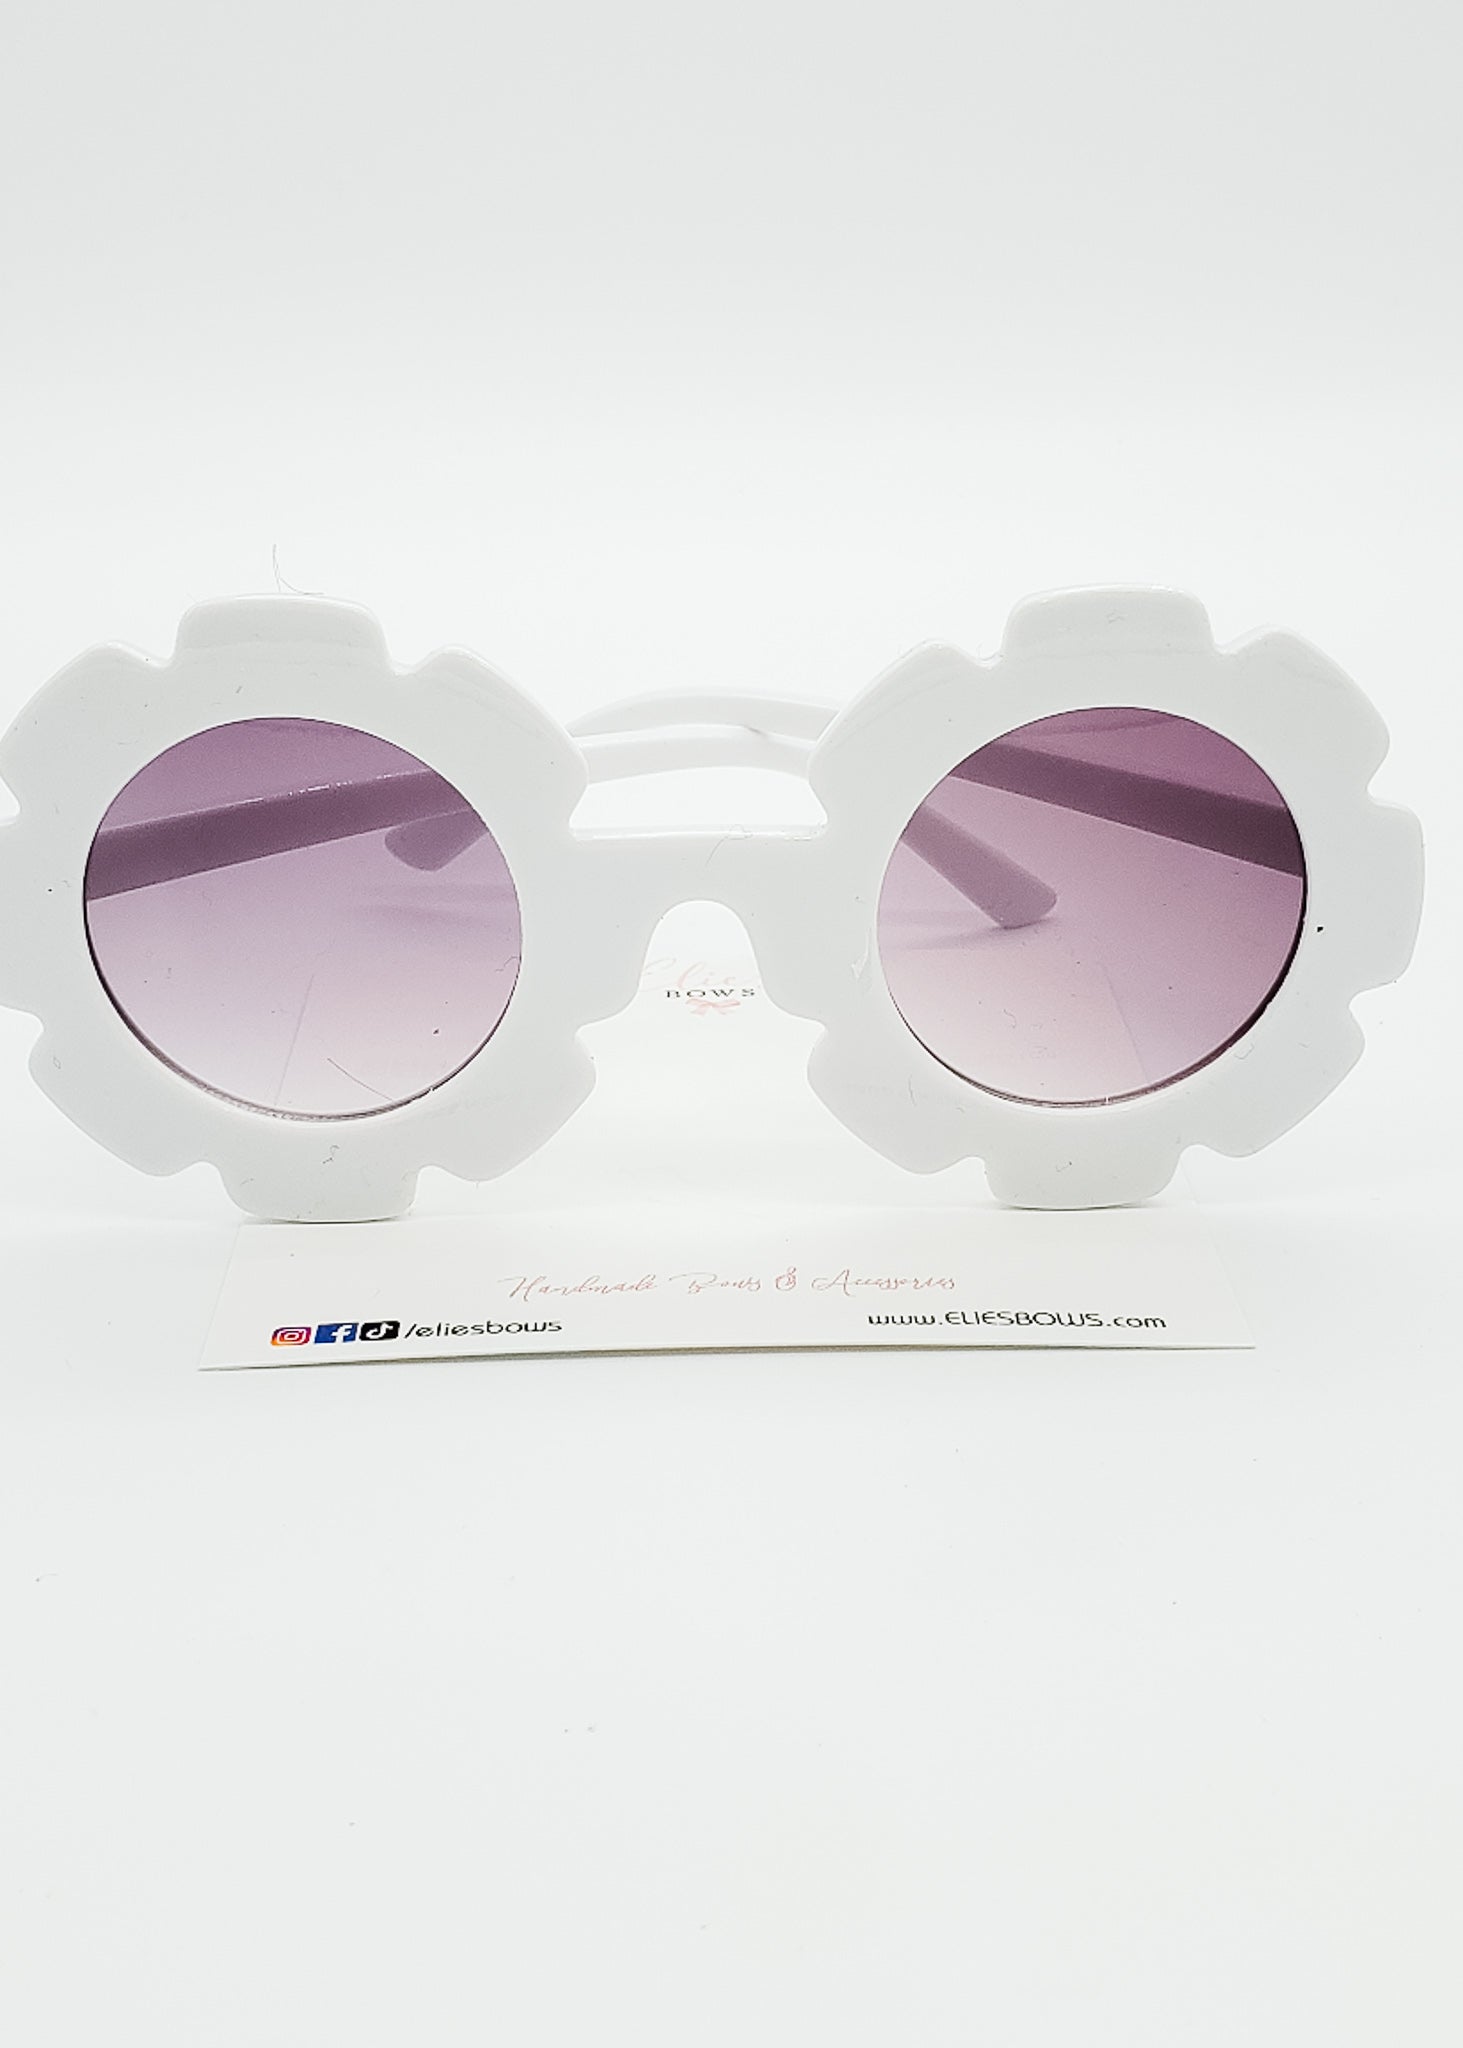 White Groovy Sunglasses - Sunglasses-Sunglasses-Elie’s Bows